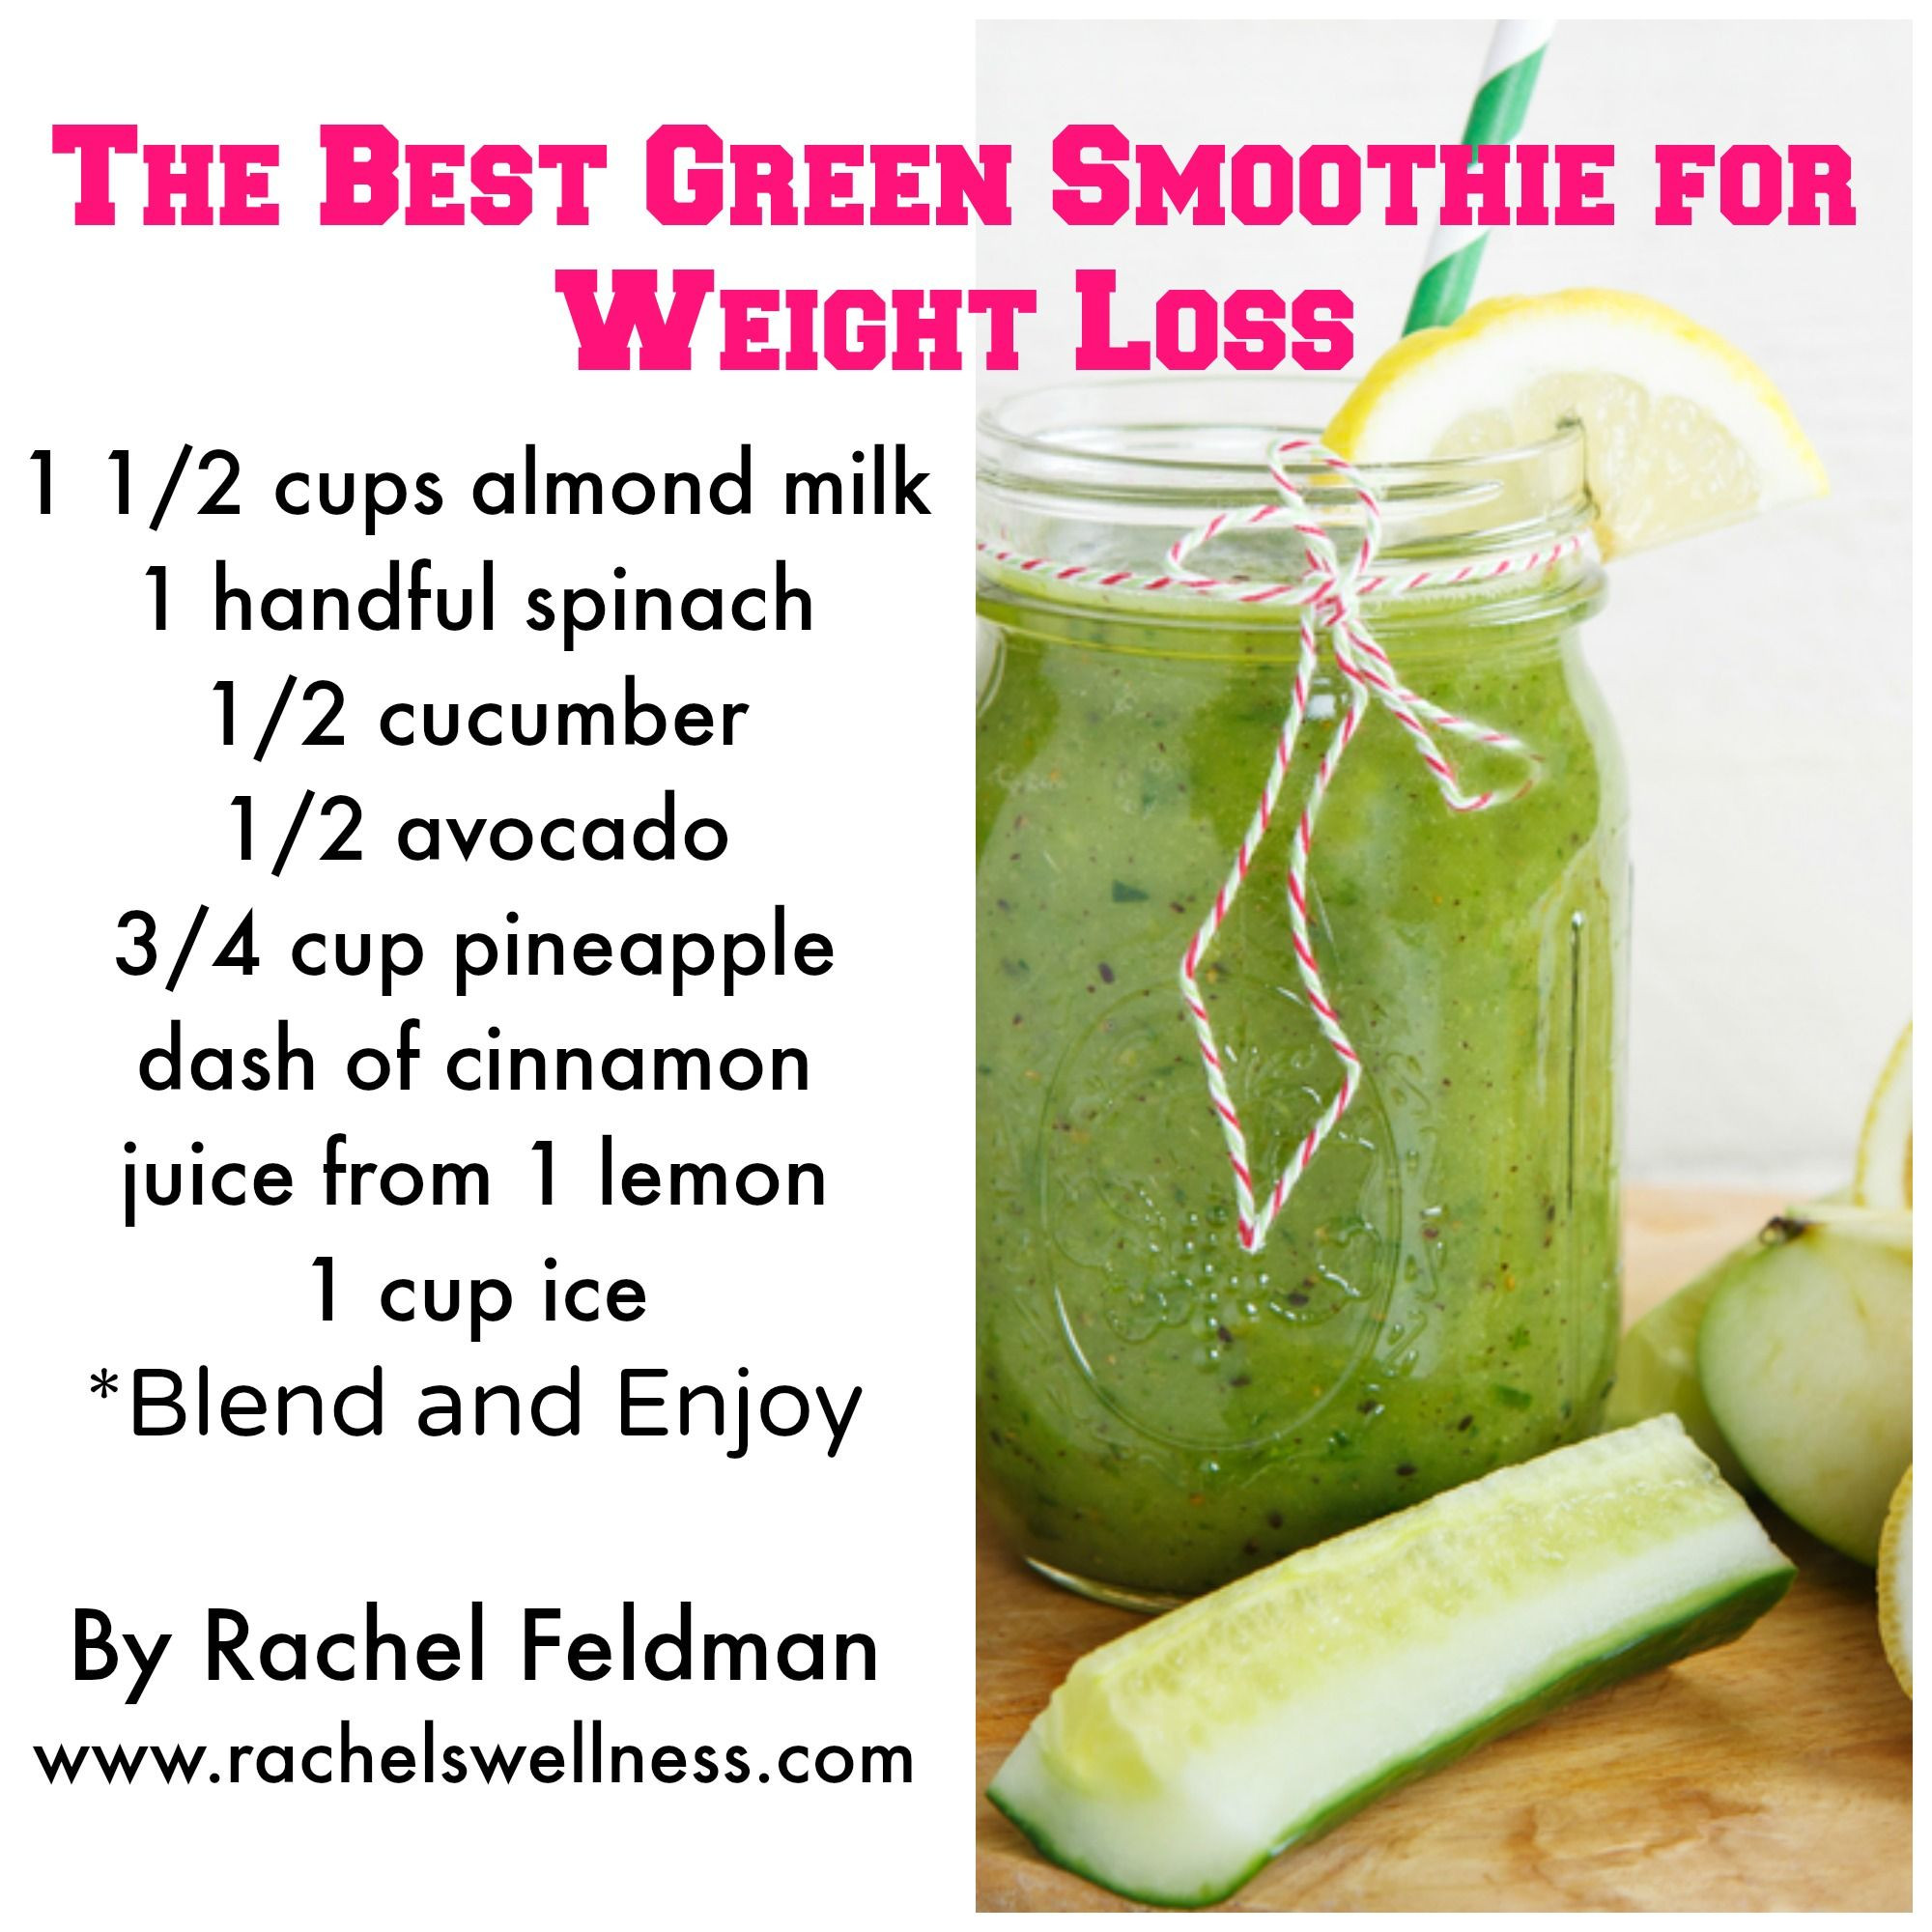 Best Green Smoothies For Weight Loss
 7 Healthy Green Smoothie Recipes For Weight Loss